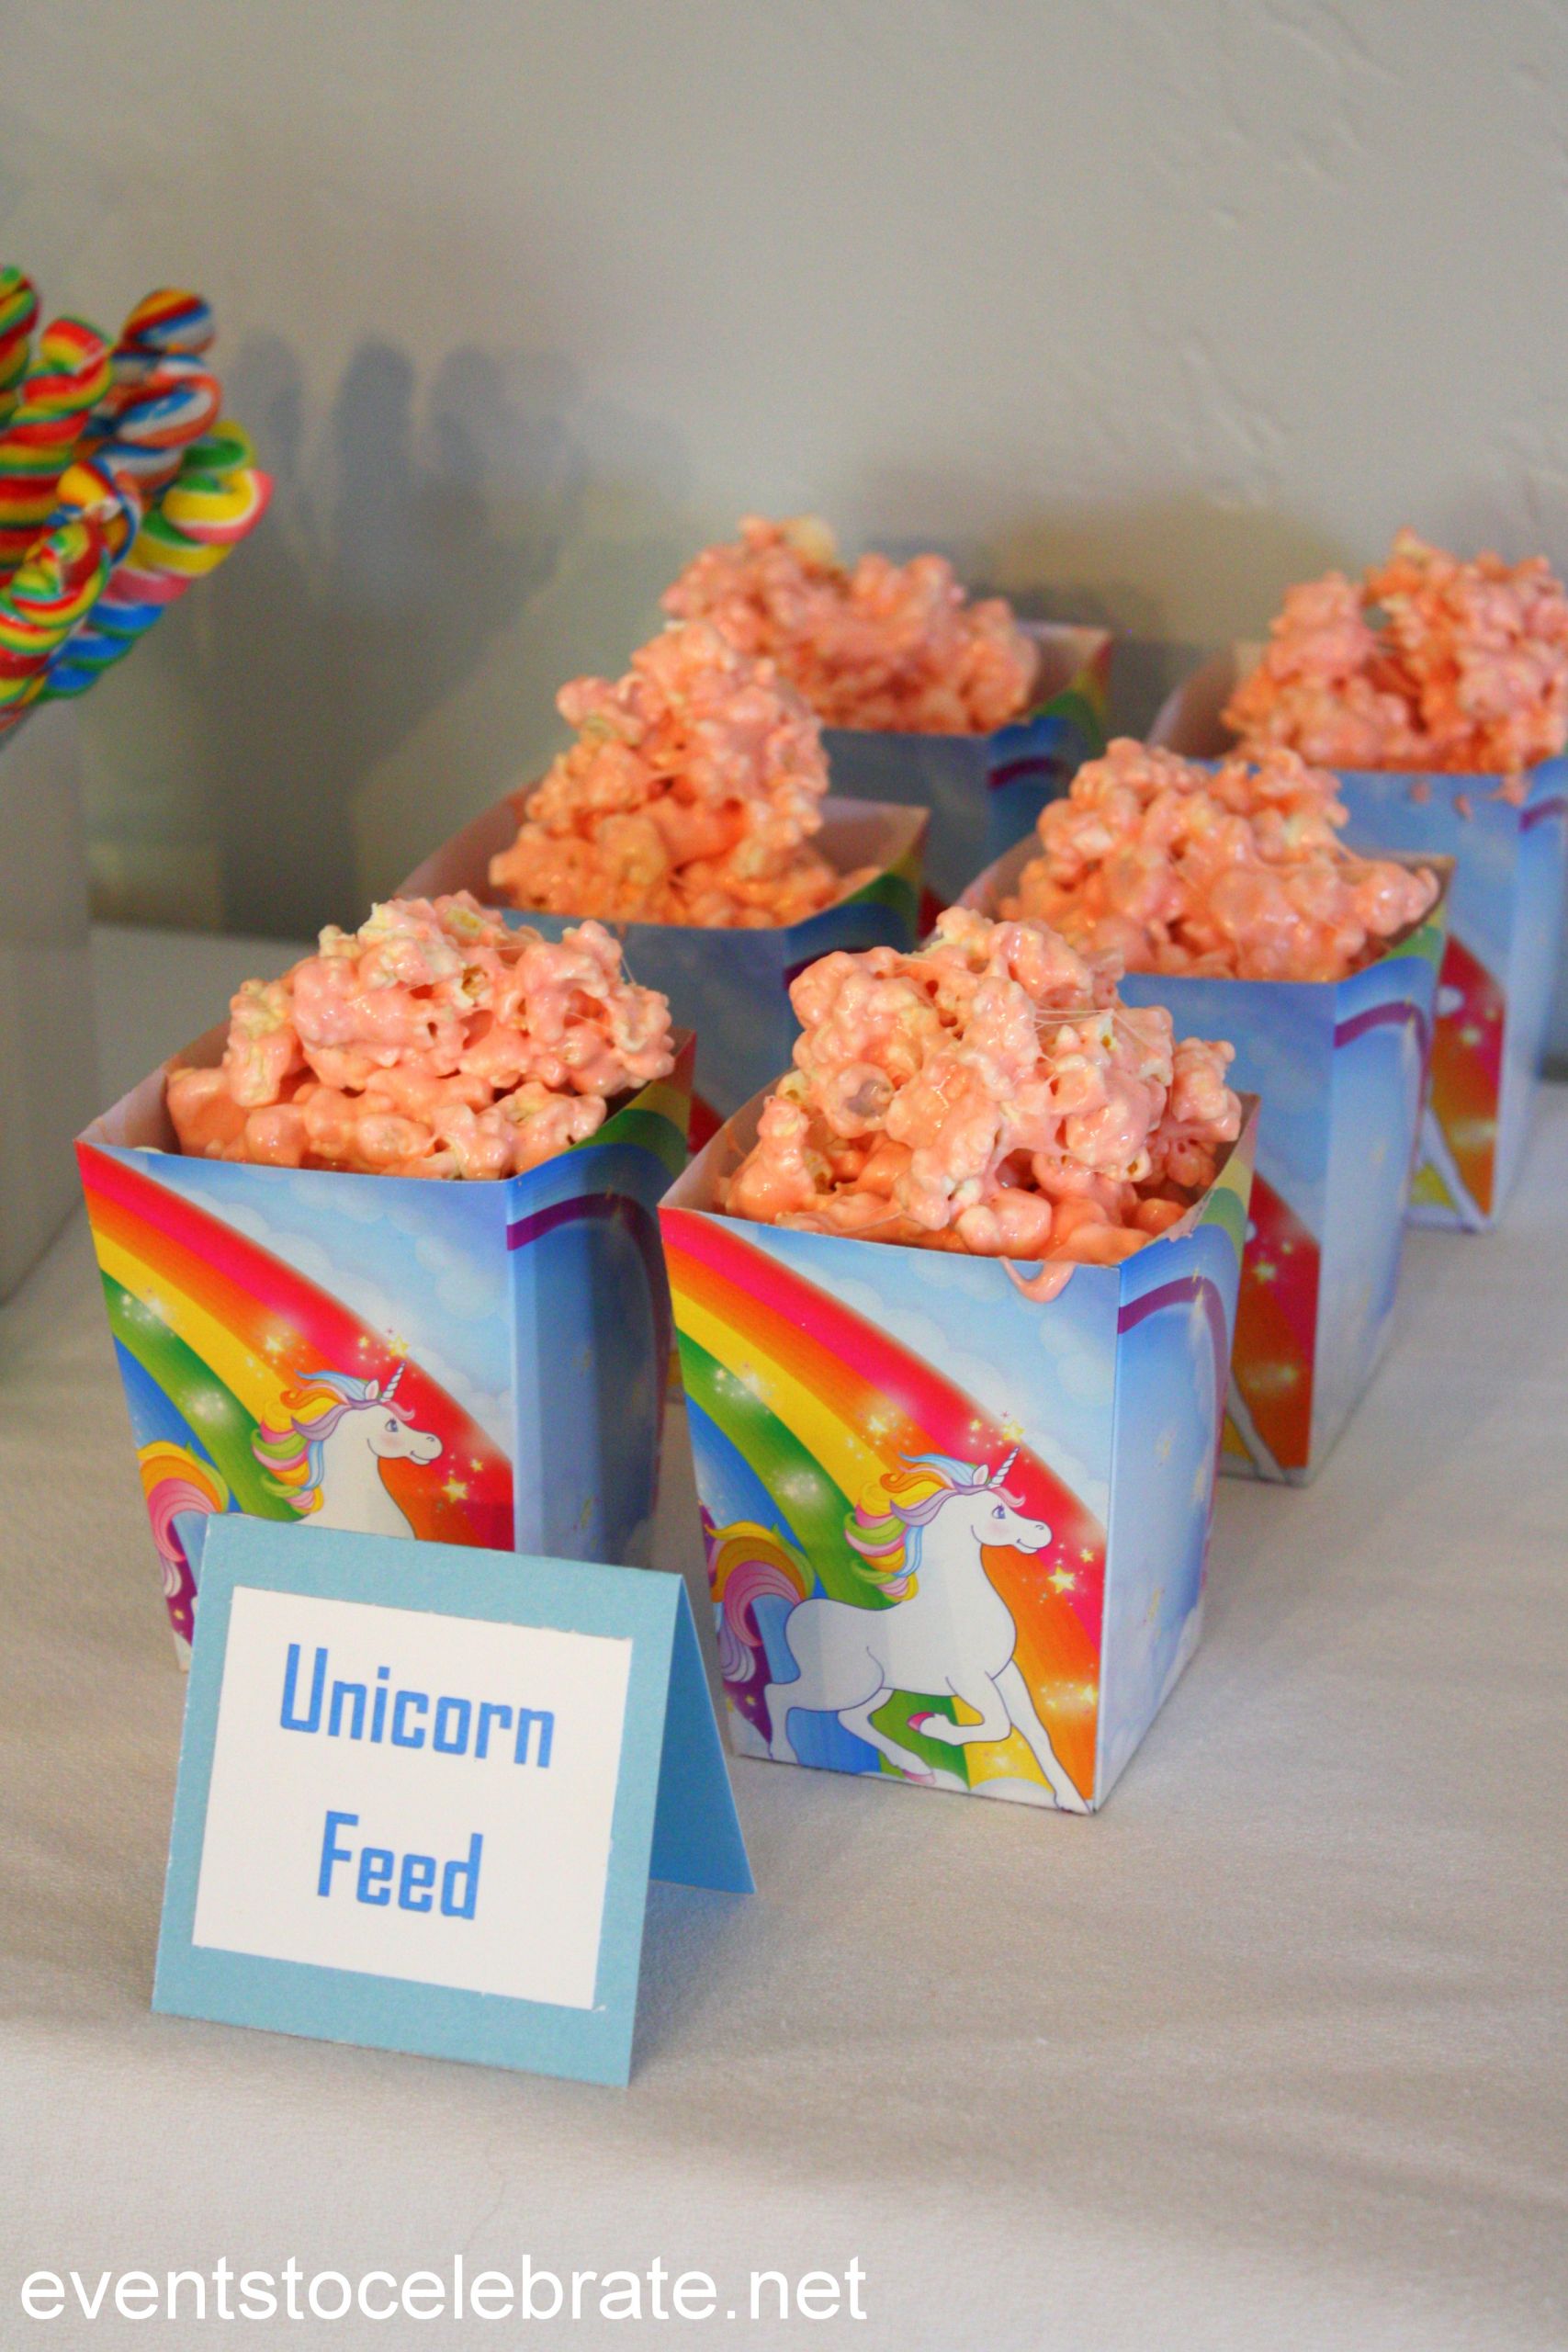 Unicorn Food Party Ideas
 Unicorn Party Decorations and Food